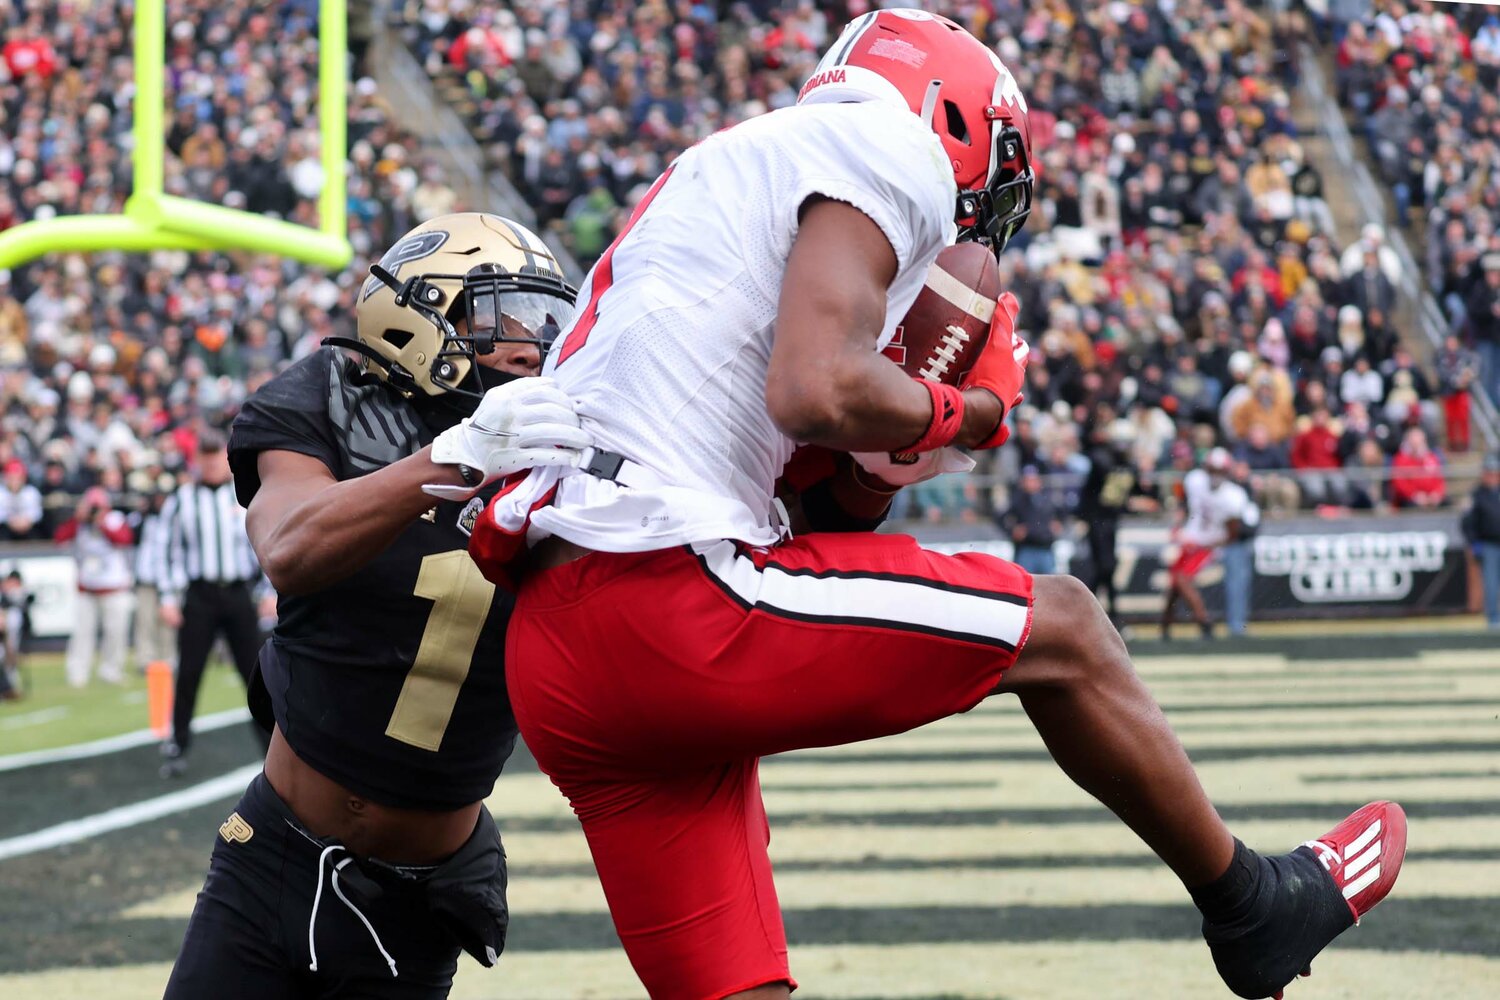 Donaven McCullley of Indiana - catching 10-yard TD pass in front of Markevious Brown of Purdue